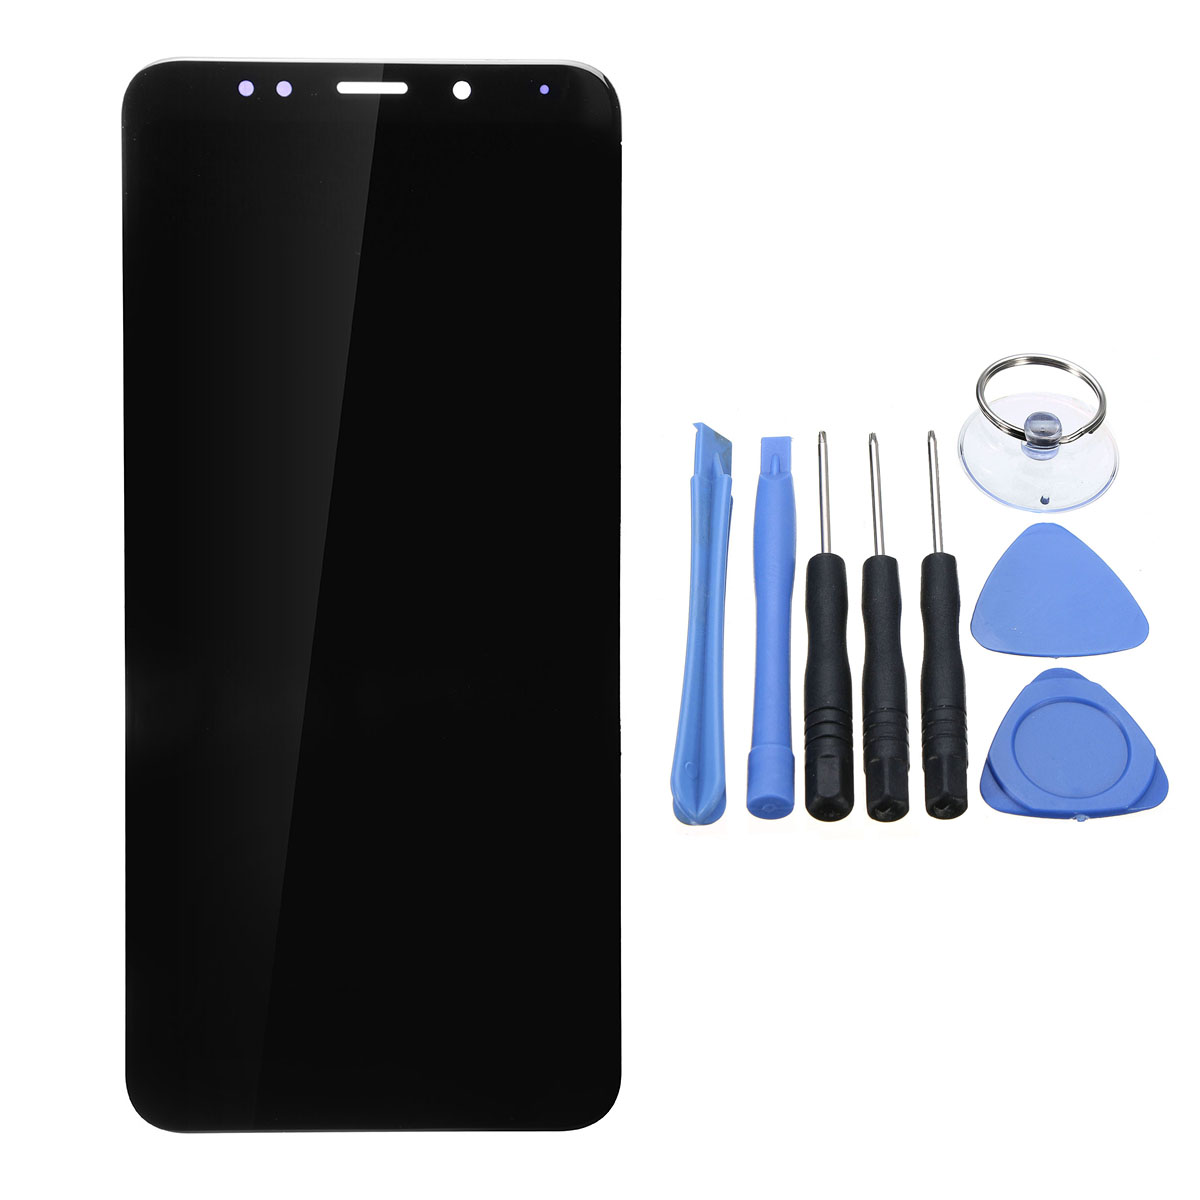 

Touch Screen Digitizer Glass+LCD Display Assembly Screen Replacement +Tools For Xiaomi Redmi 5 Plus